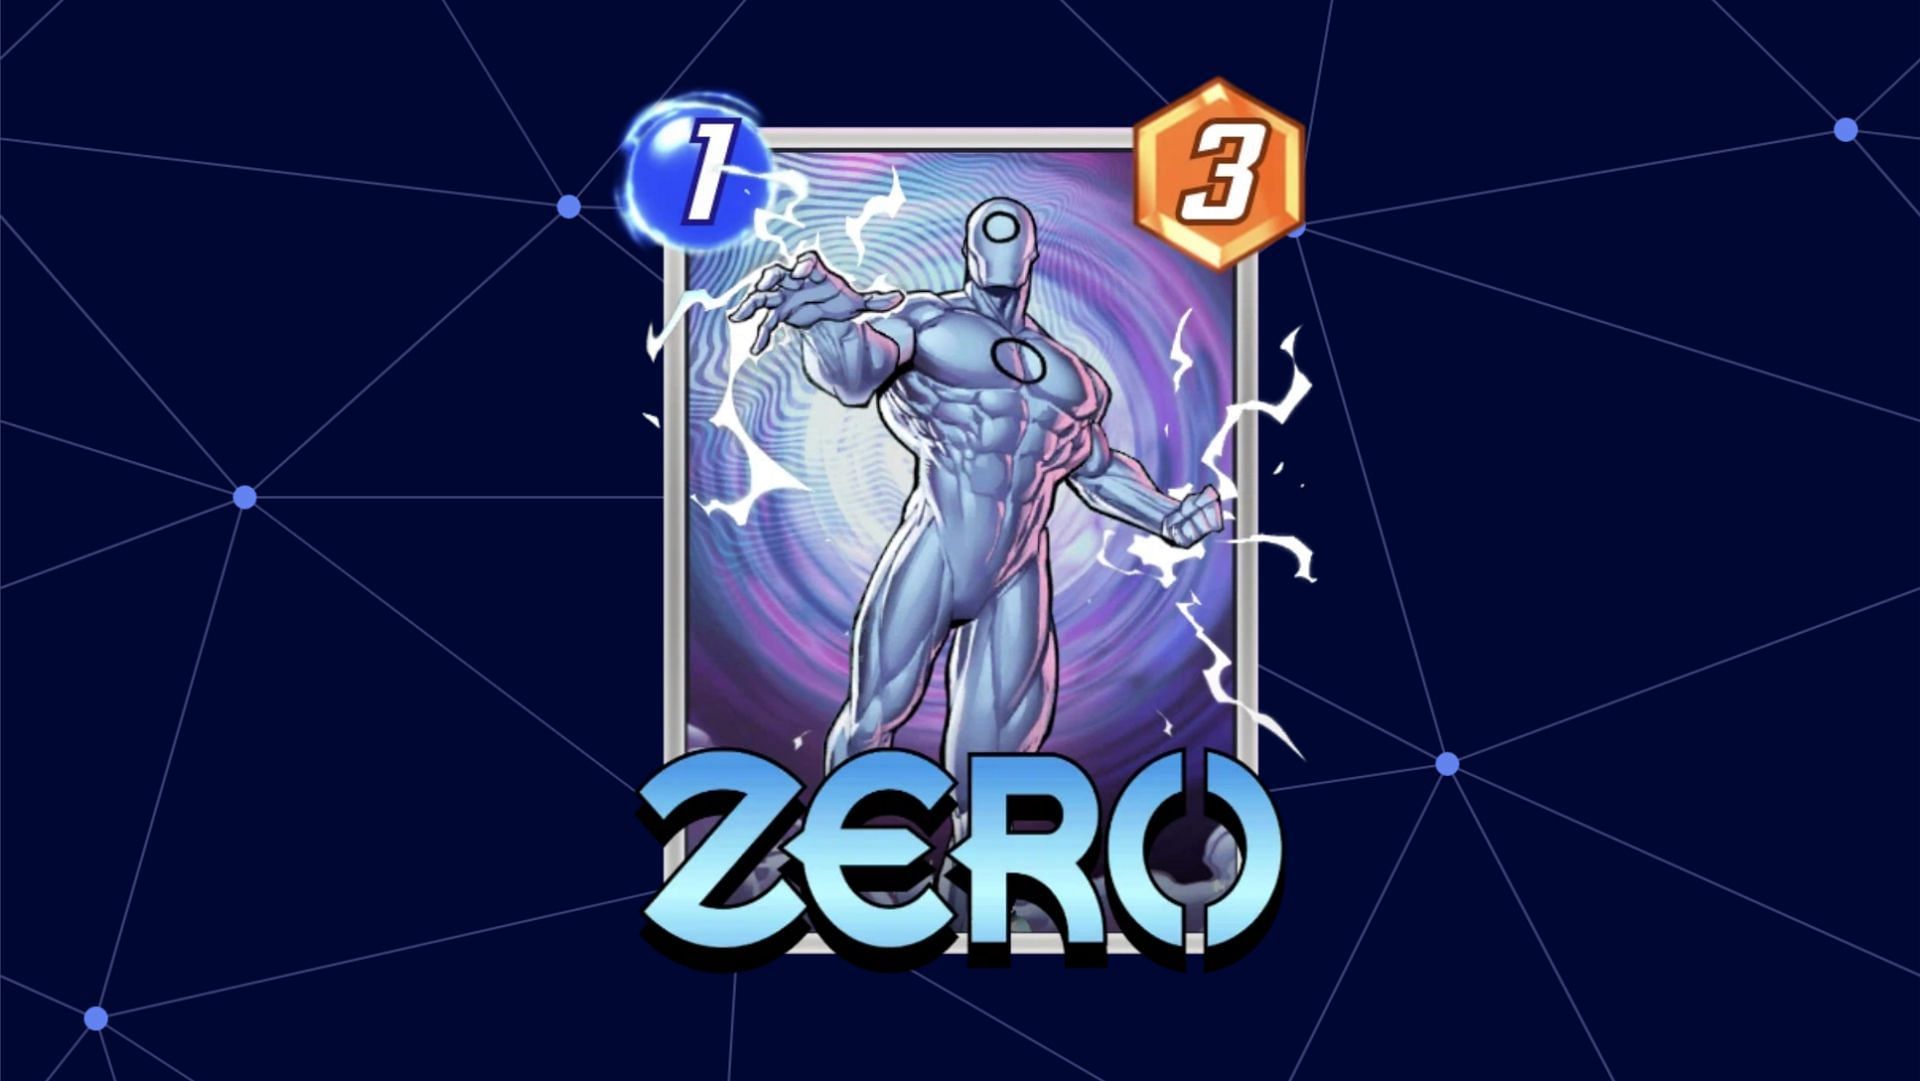 Zero, as depicted by his in-game card art (Image via marvelsnap.io)